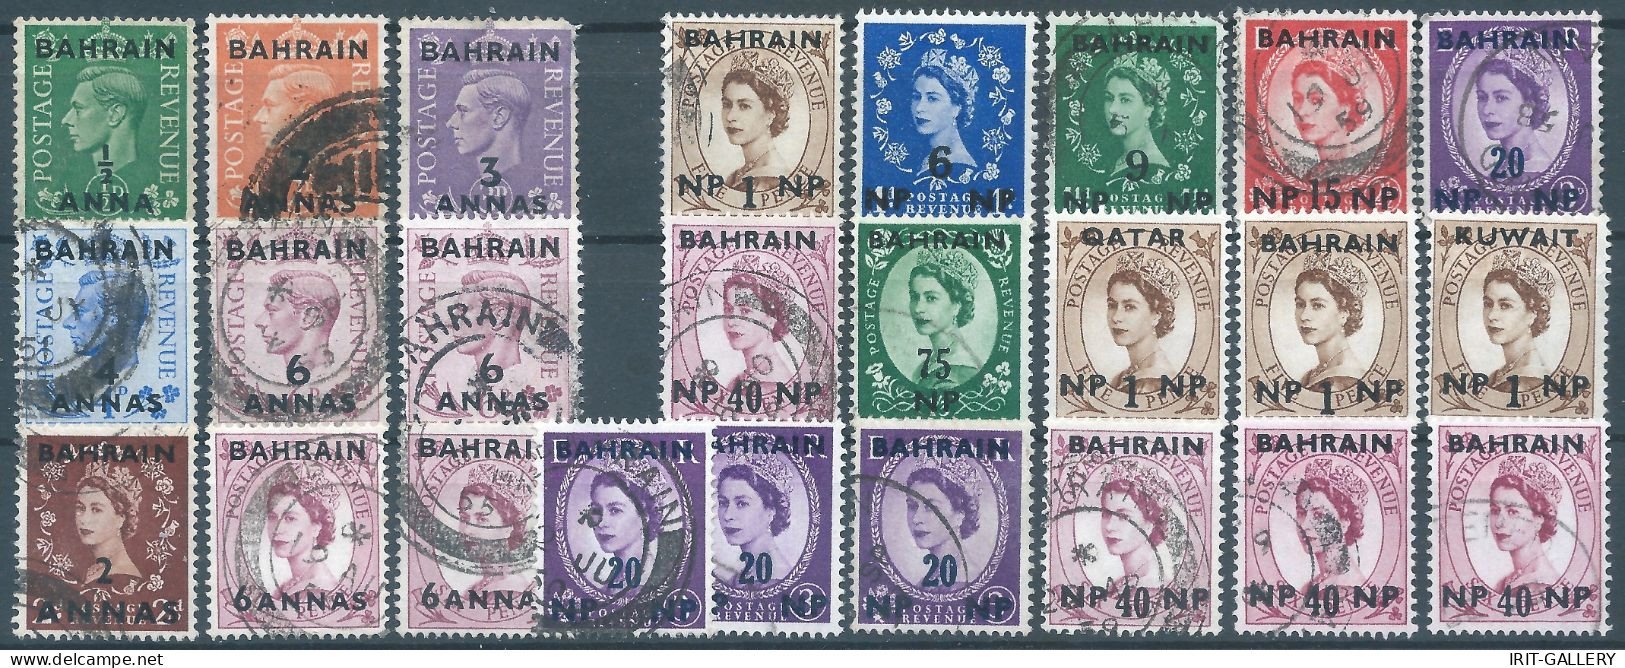 Bahrein,1948-1957 Great Britain Postage & Revenue Stamps Overprinted "BAHRIAN" Used,Mix - Bahreïn (...-1965)